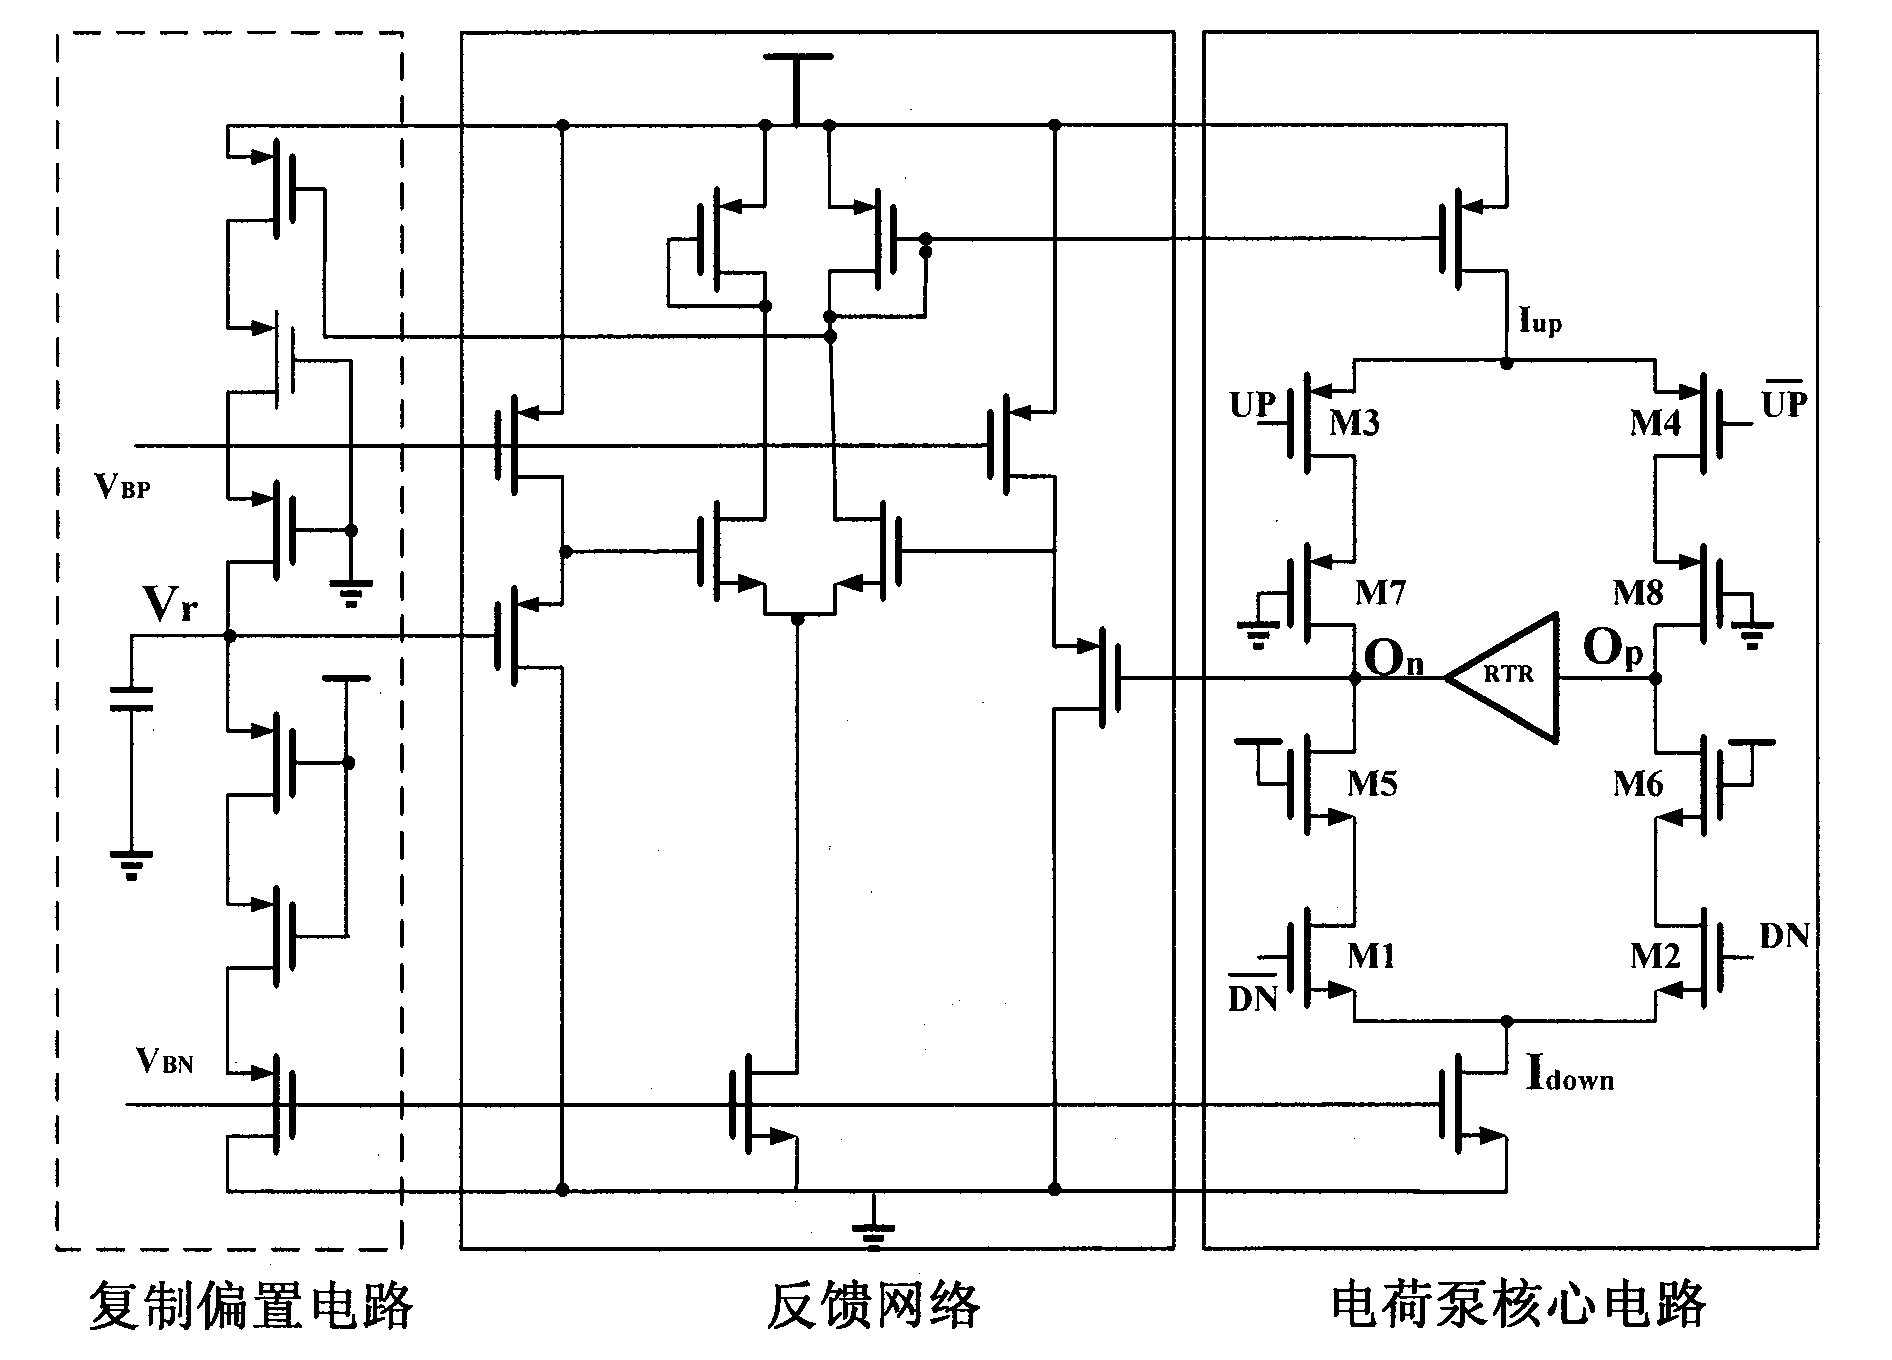 Automatic-tracking current type charge pump for phase-locking loop